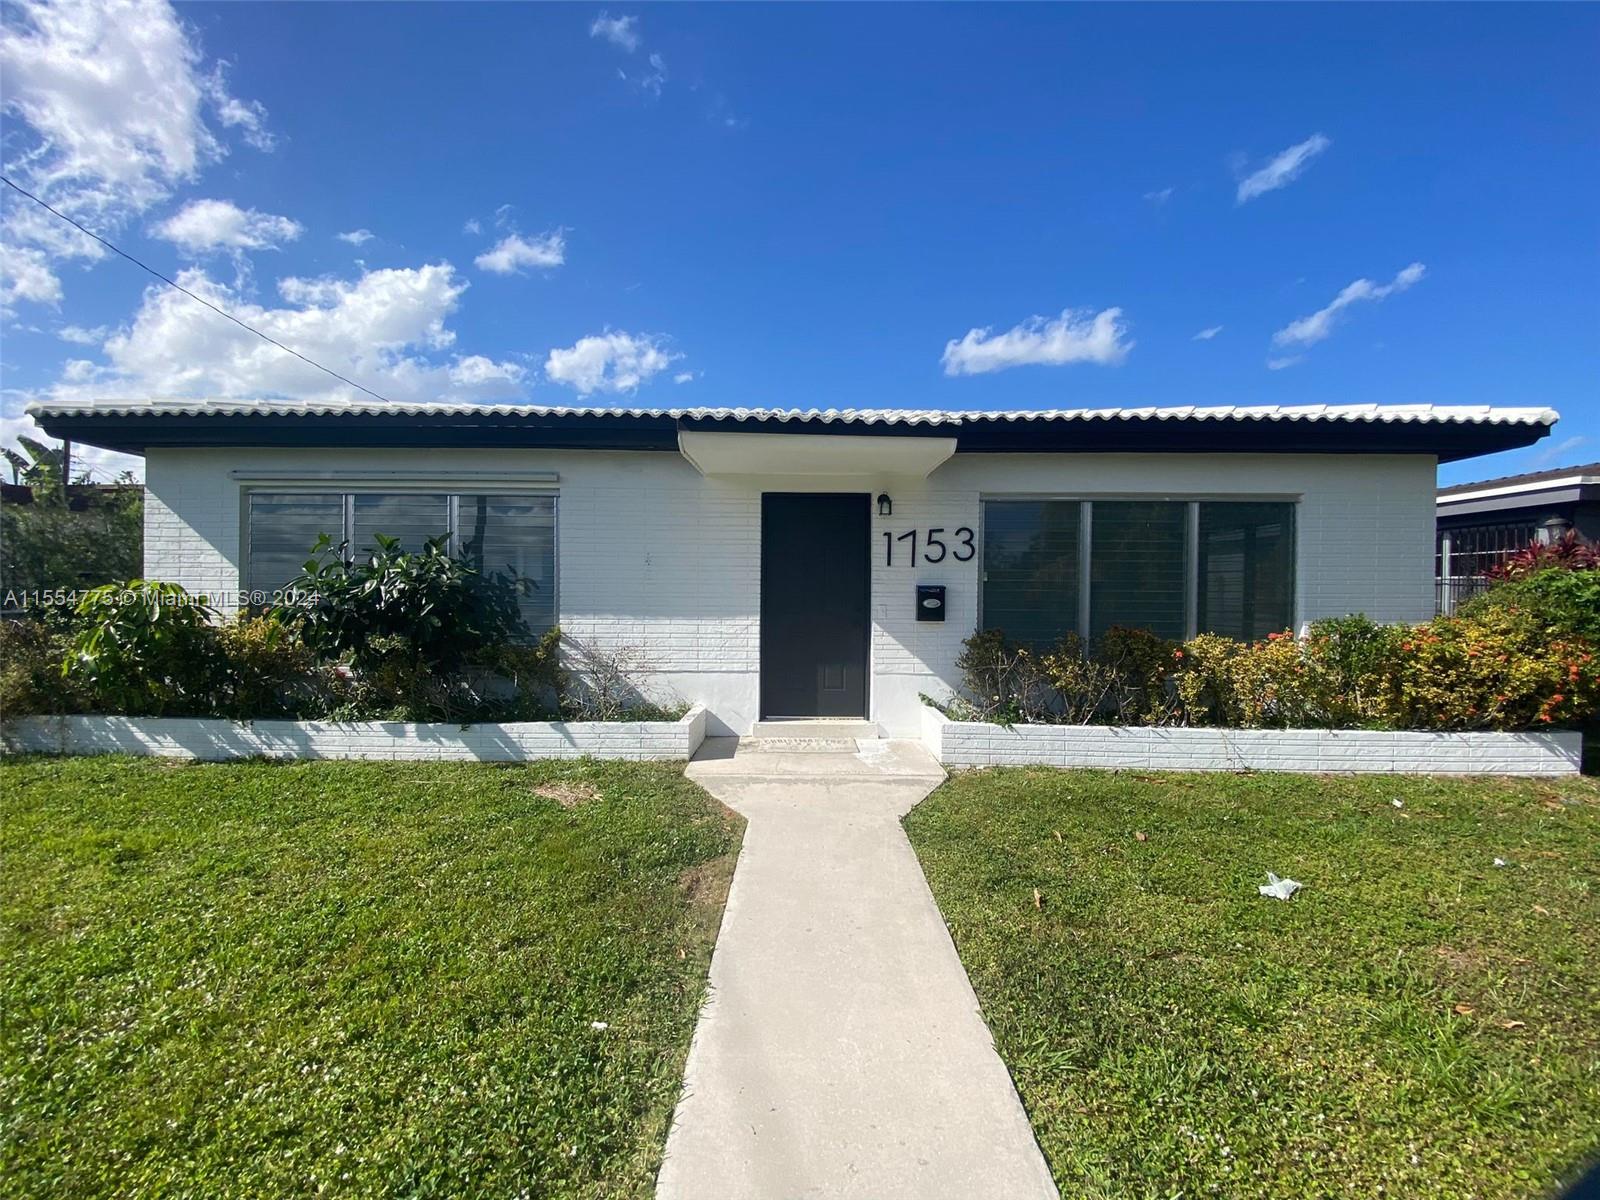 Address Not Disclosed, North Miami Beach, Miami-Dade County, Florida - 3 Bedrooms  
2 Bathrooms - 